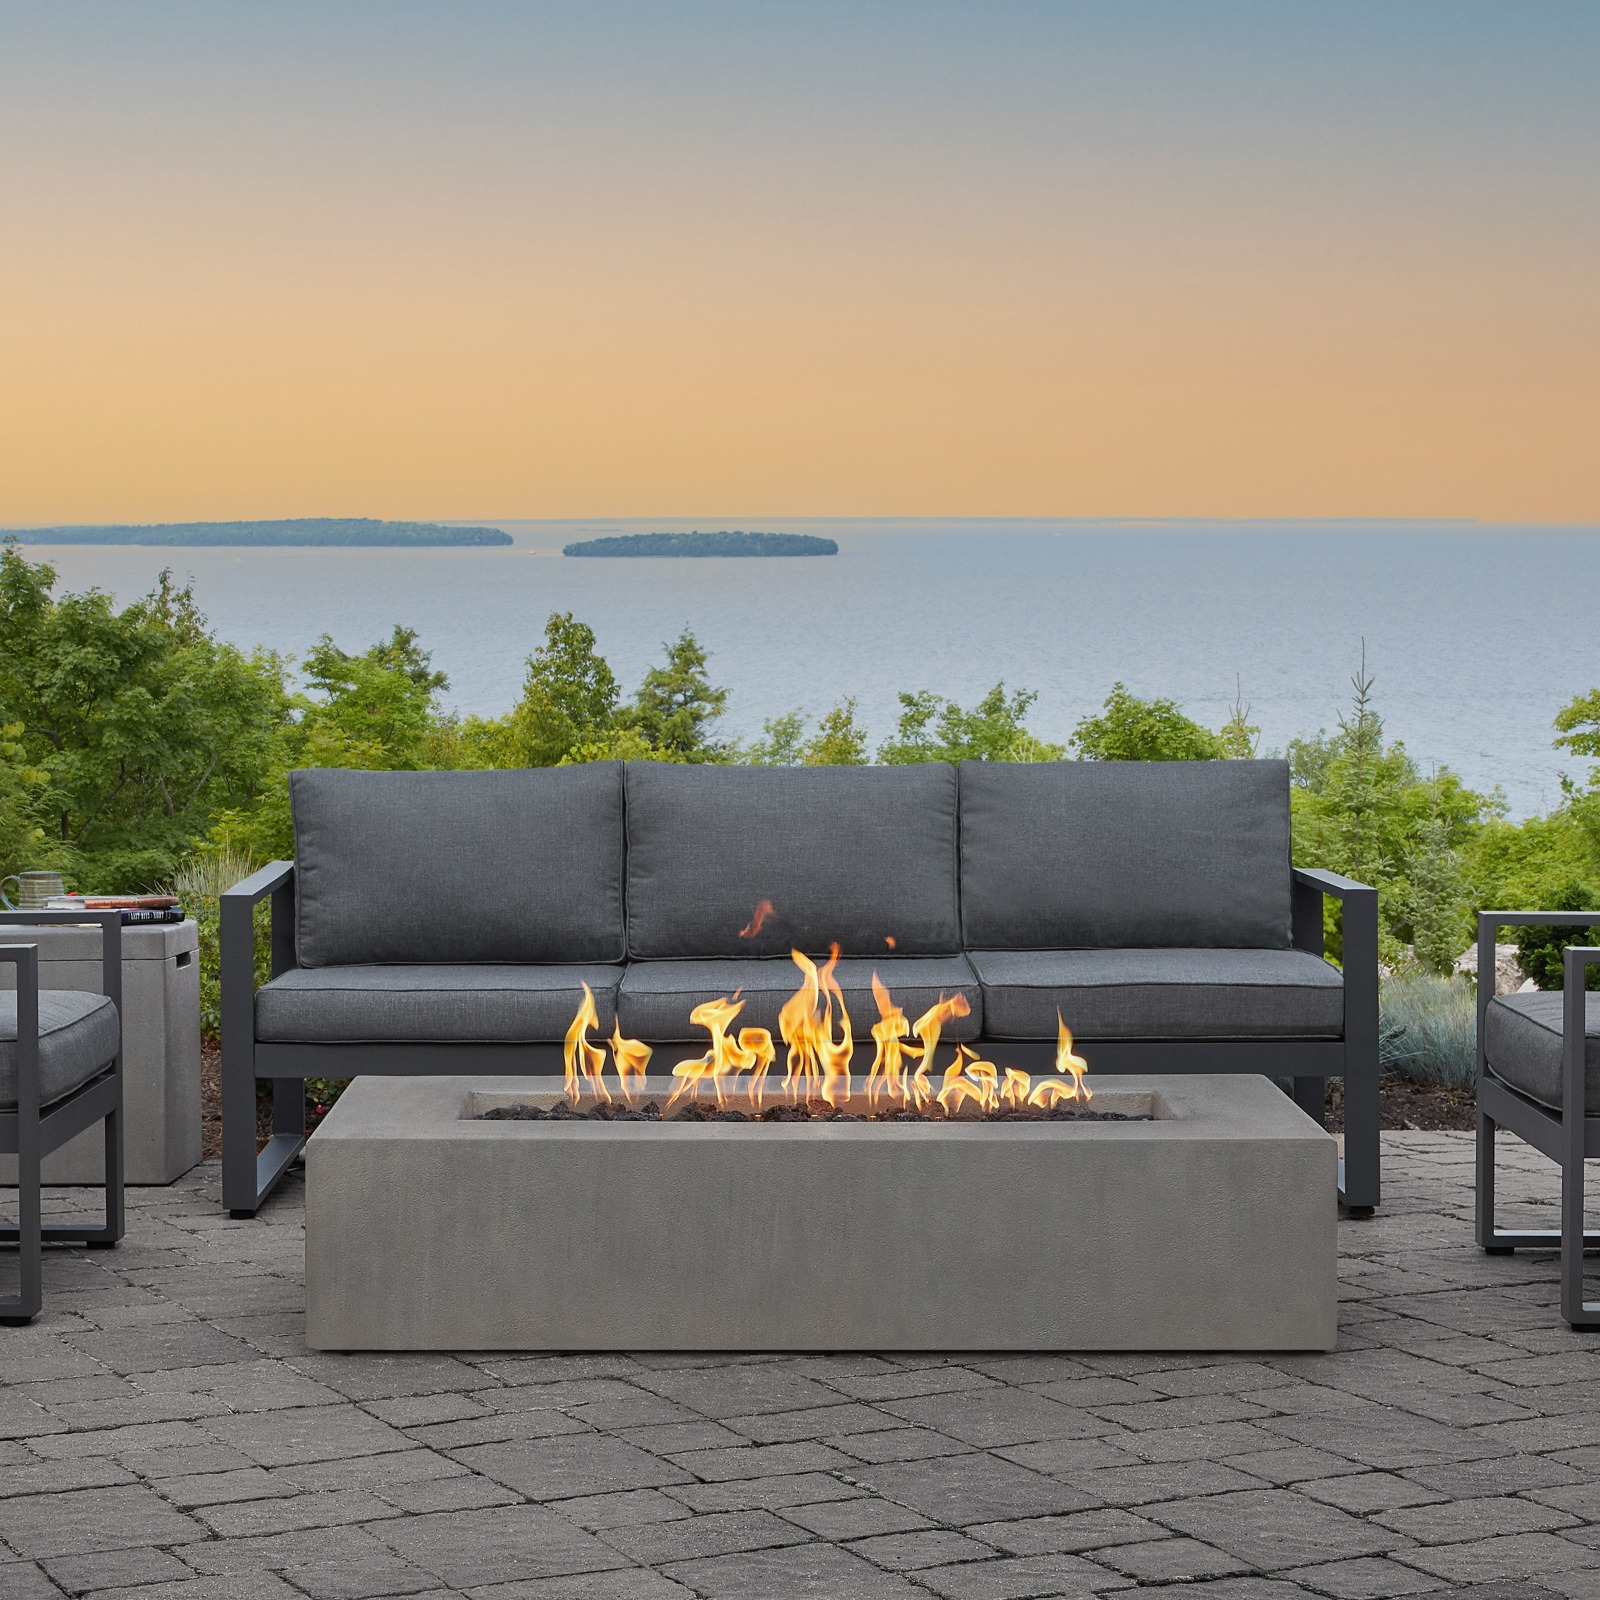 Estes Low Rectangle GFRC Outdoor Natural Gas or Propane Fire Pit Fireplace Fire Table for Backyard or Patio